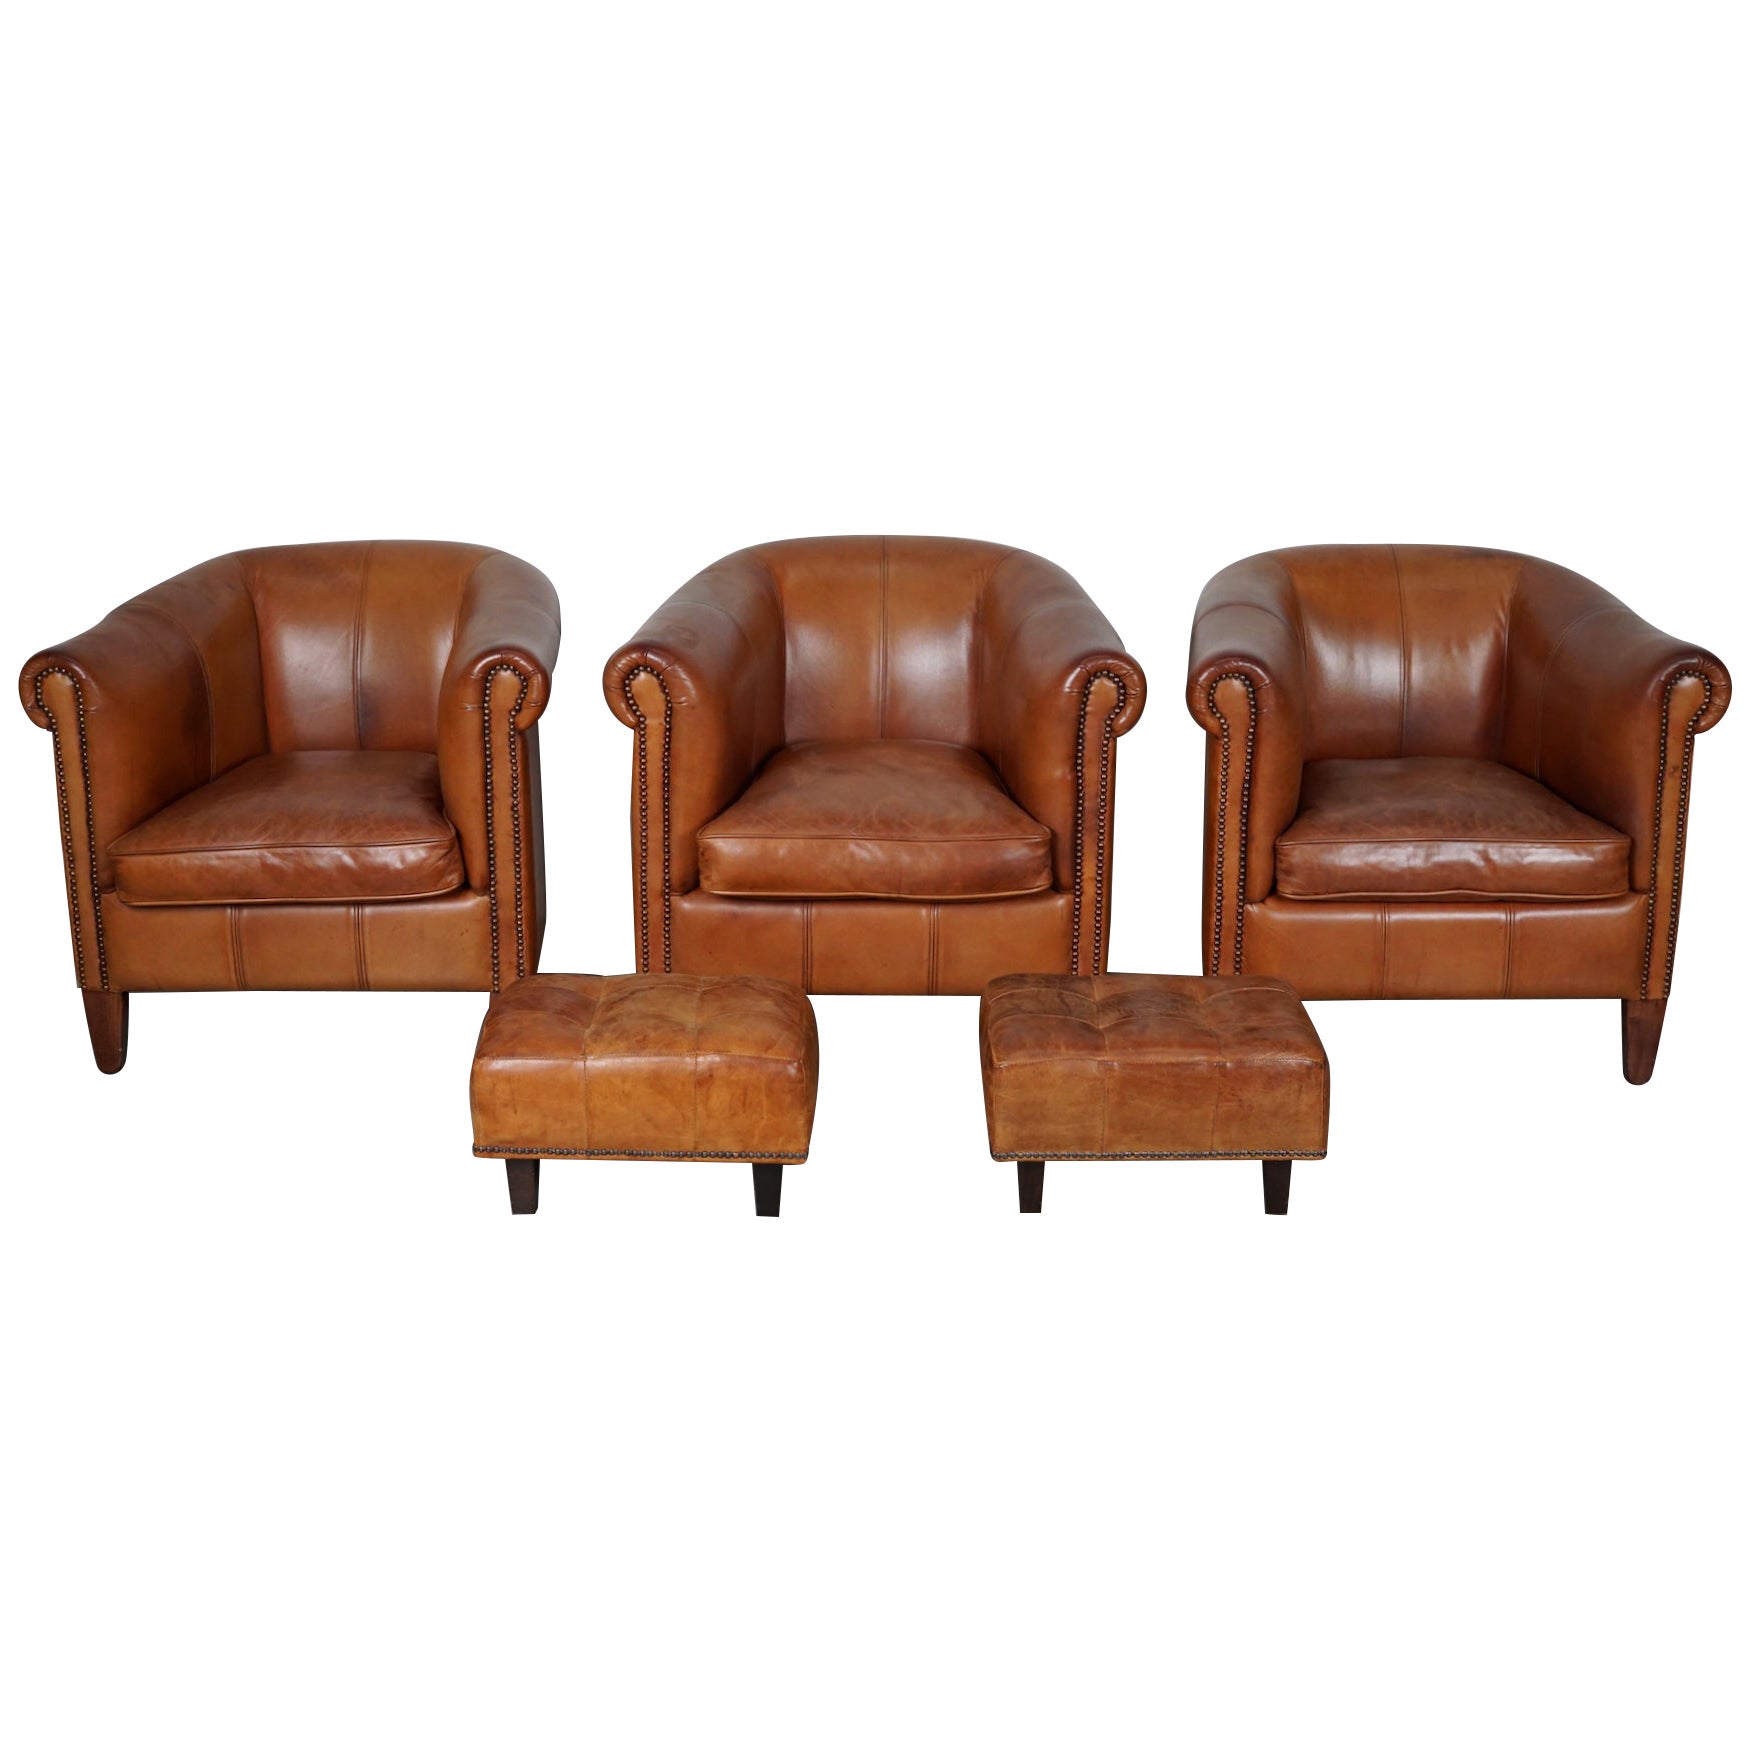  Vintage Dutch Cognac Leather Club Chairs, Set of Three with Two Footstools For Sale